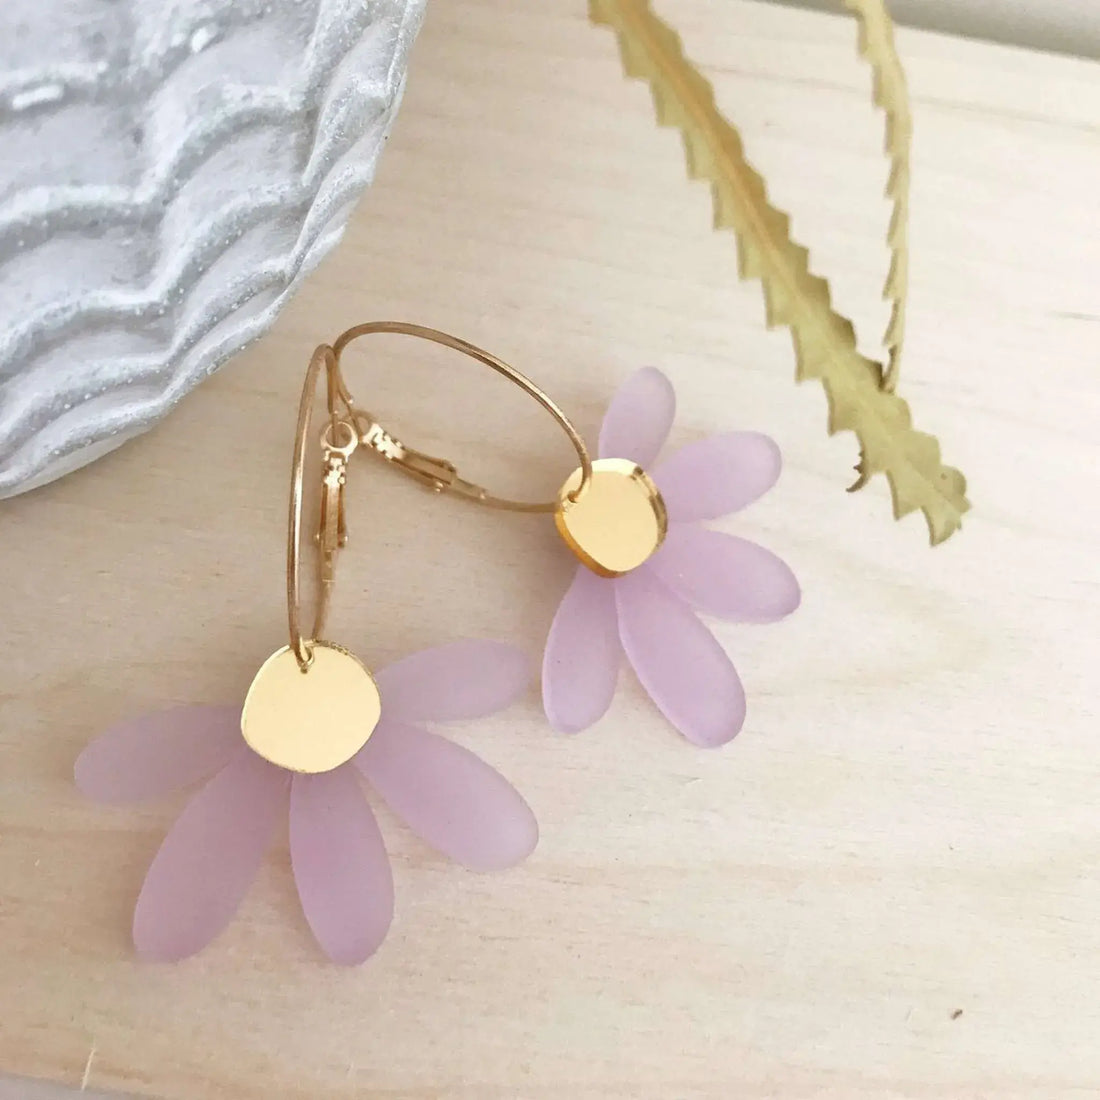 Jumbo Daisy Hoop Earrings in Frosted Lilac &amp; Gold by Foxie Collective